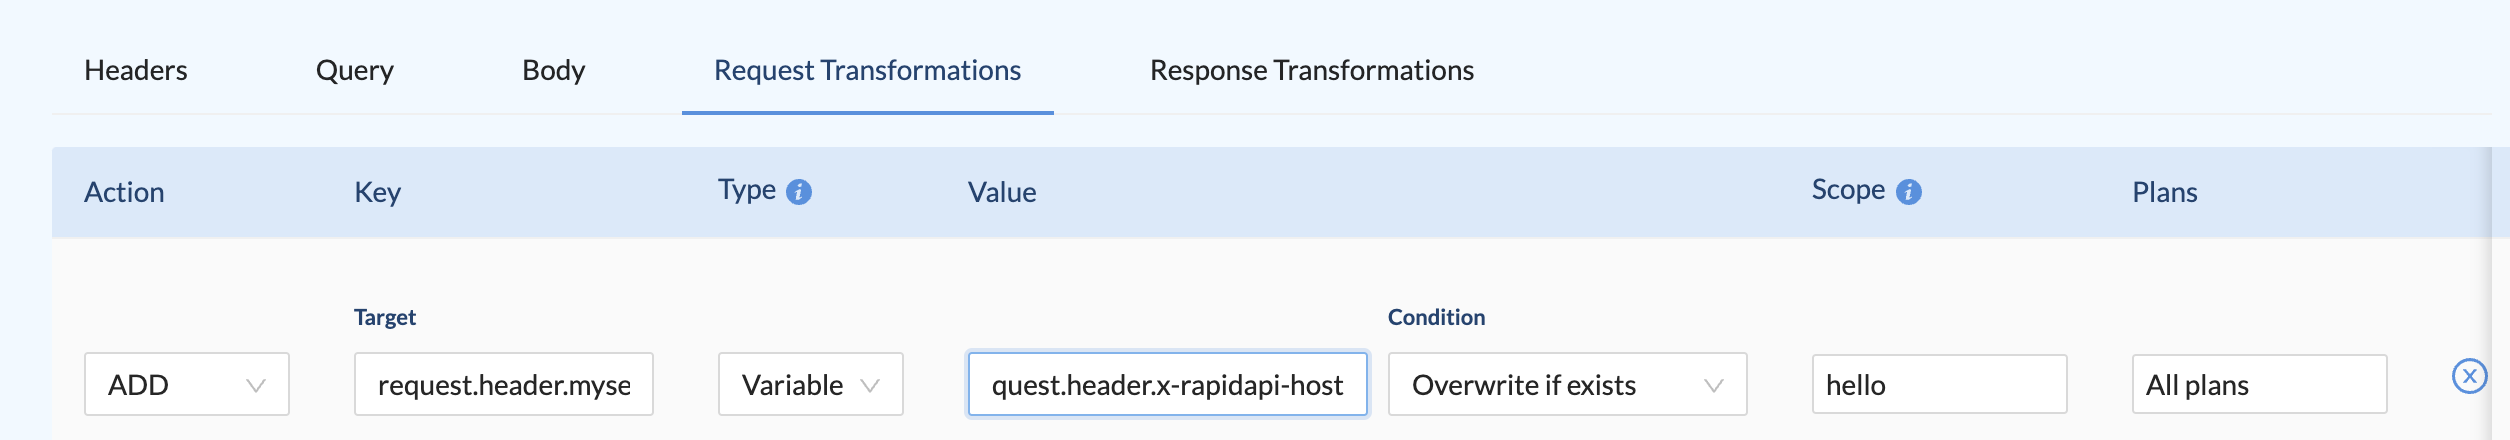 Setting a Variable value for the new 'mysecret' header. It copies the existing value of the 'x-rapidapi-host' header.